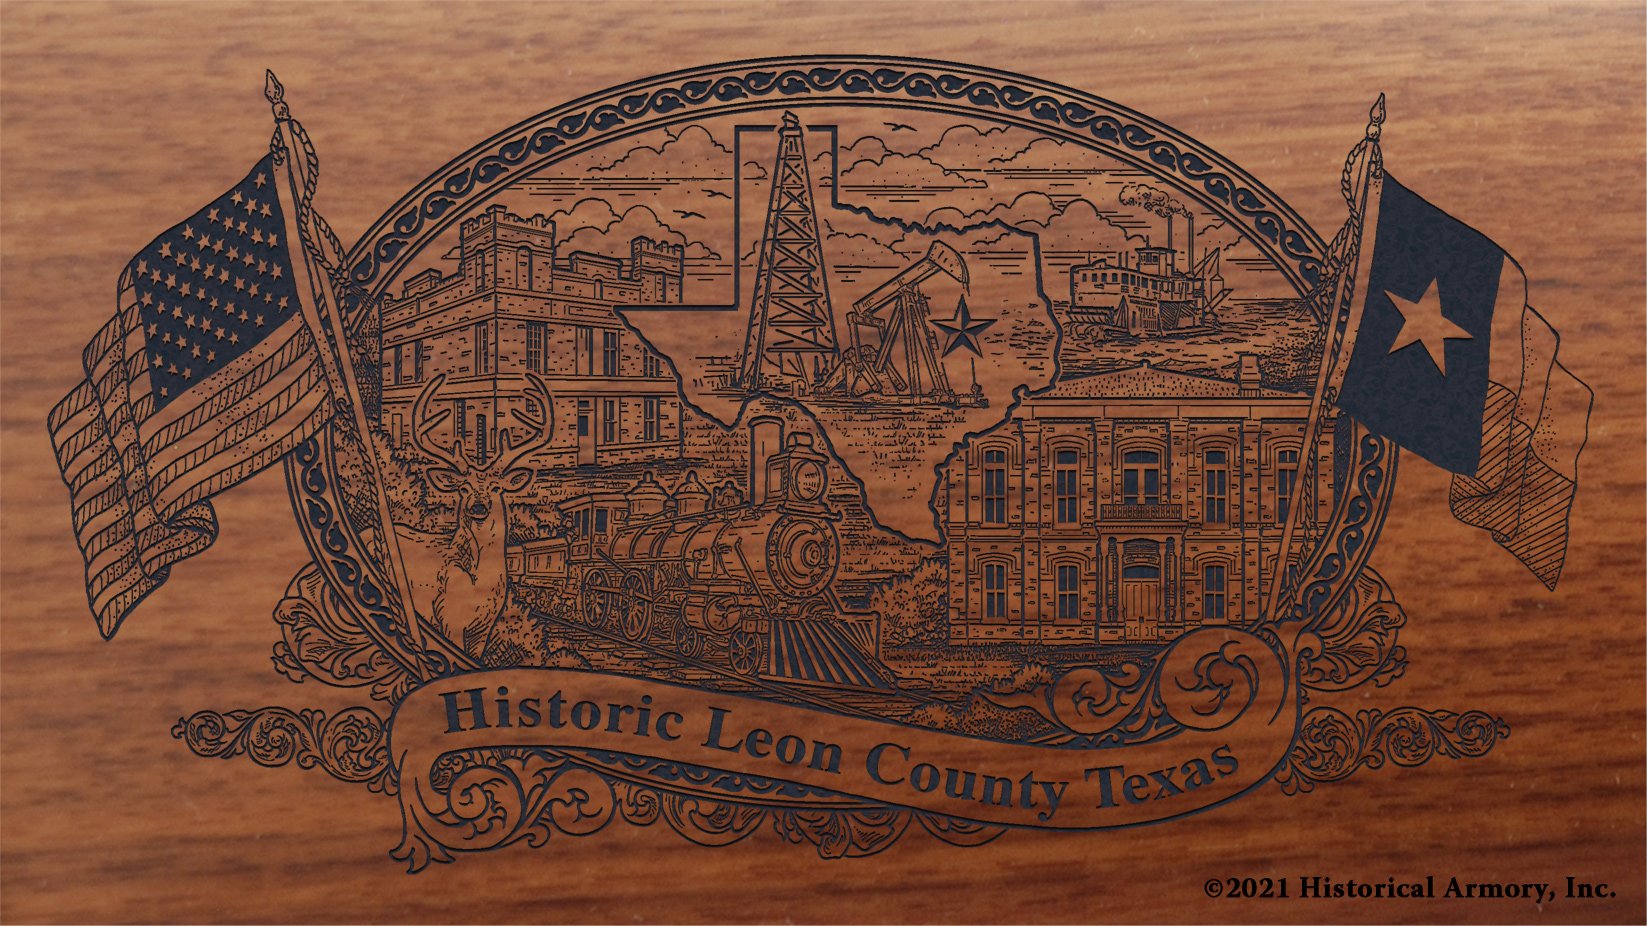 Engraved artwork | History of Leon County Texas | Historical Armory